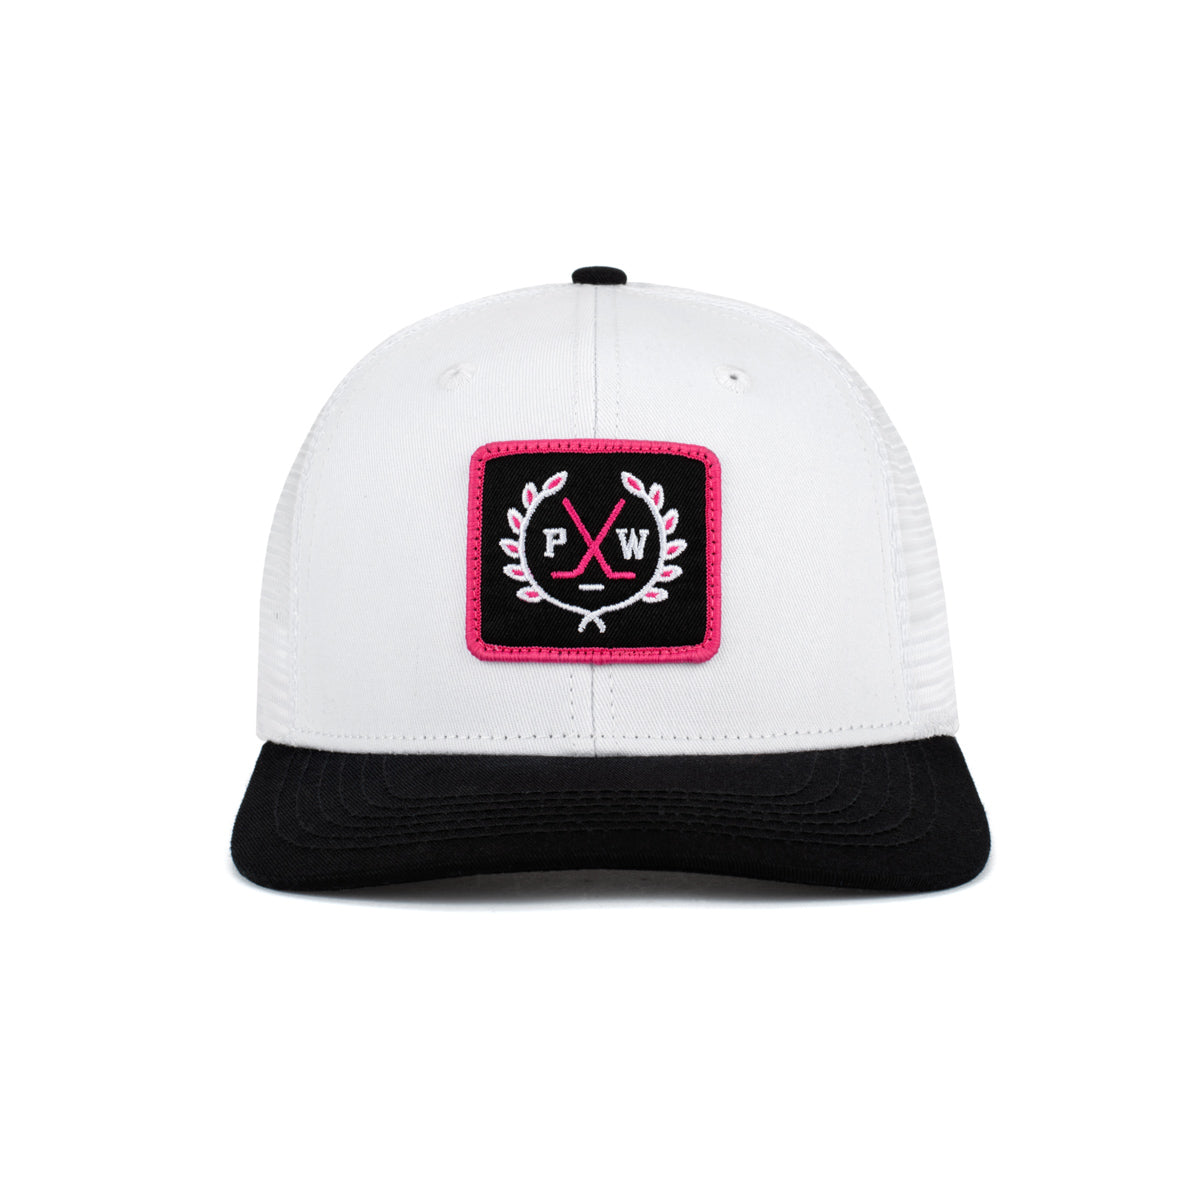 Pink Whitney Crest Patch Trucker Hat-Hats-Pink Whitney-White-One Size-Barstool Sports